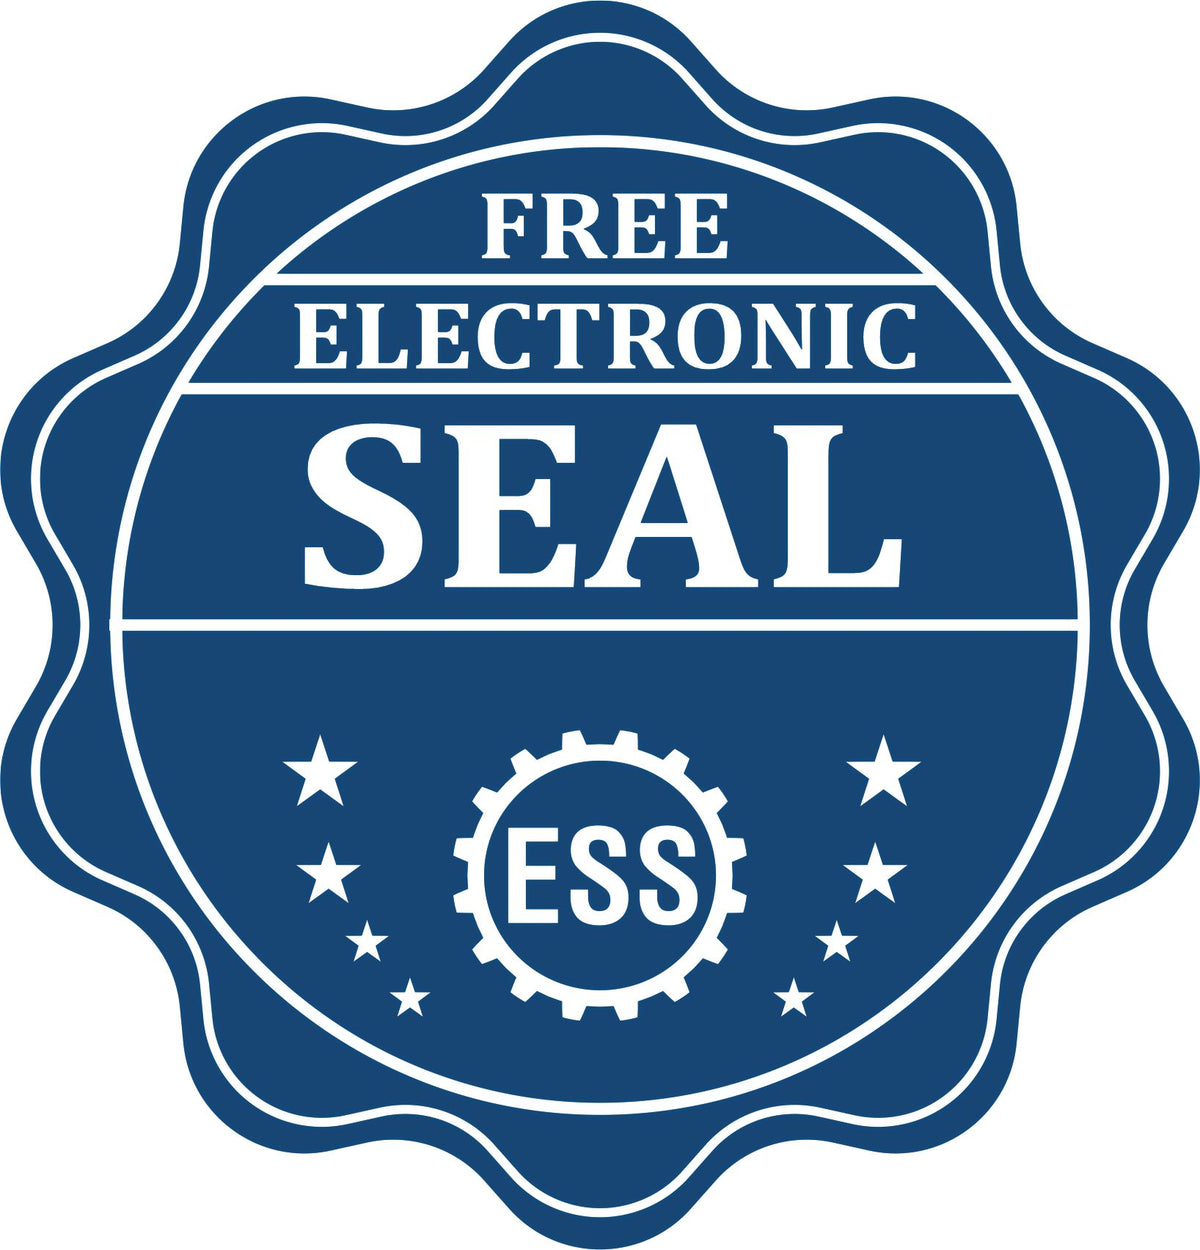 A badge showing a free electronic seal for the Premium MaxLight Pre-Inked Maryland Geology Stamp with stars and the ESS gear on the emblem.